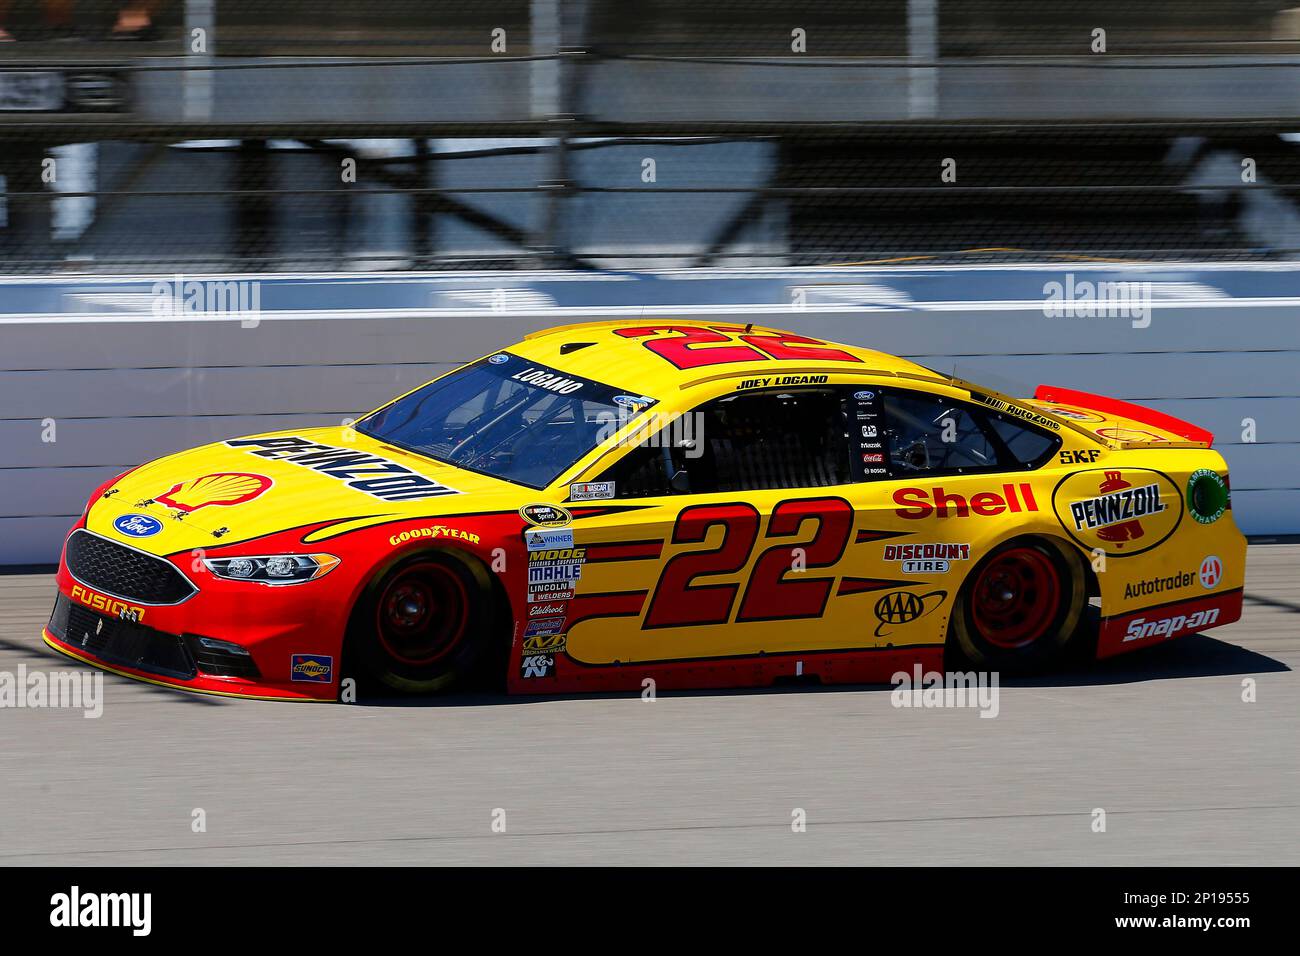 Joey Logano during the NASCAR FireKeepers Casino 400 auto race at Michigan International Speedway, Sunday, June, 12, 2016, in Brooklyn, Mich